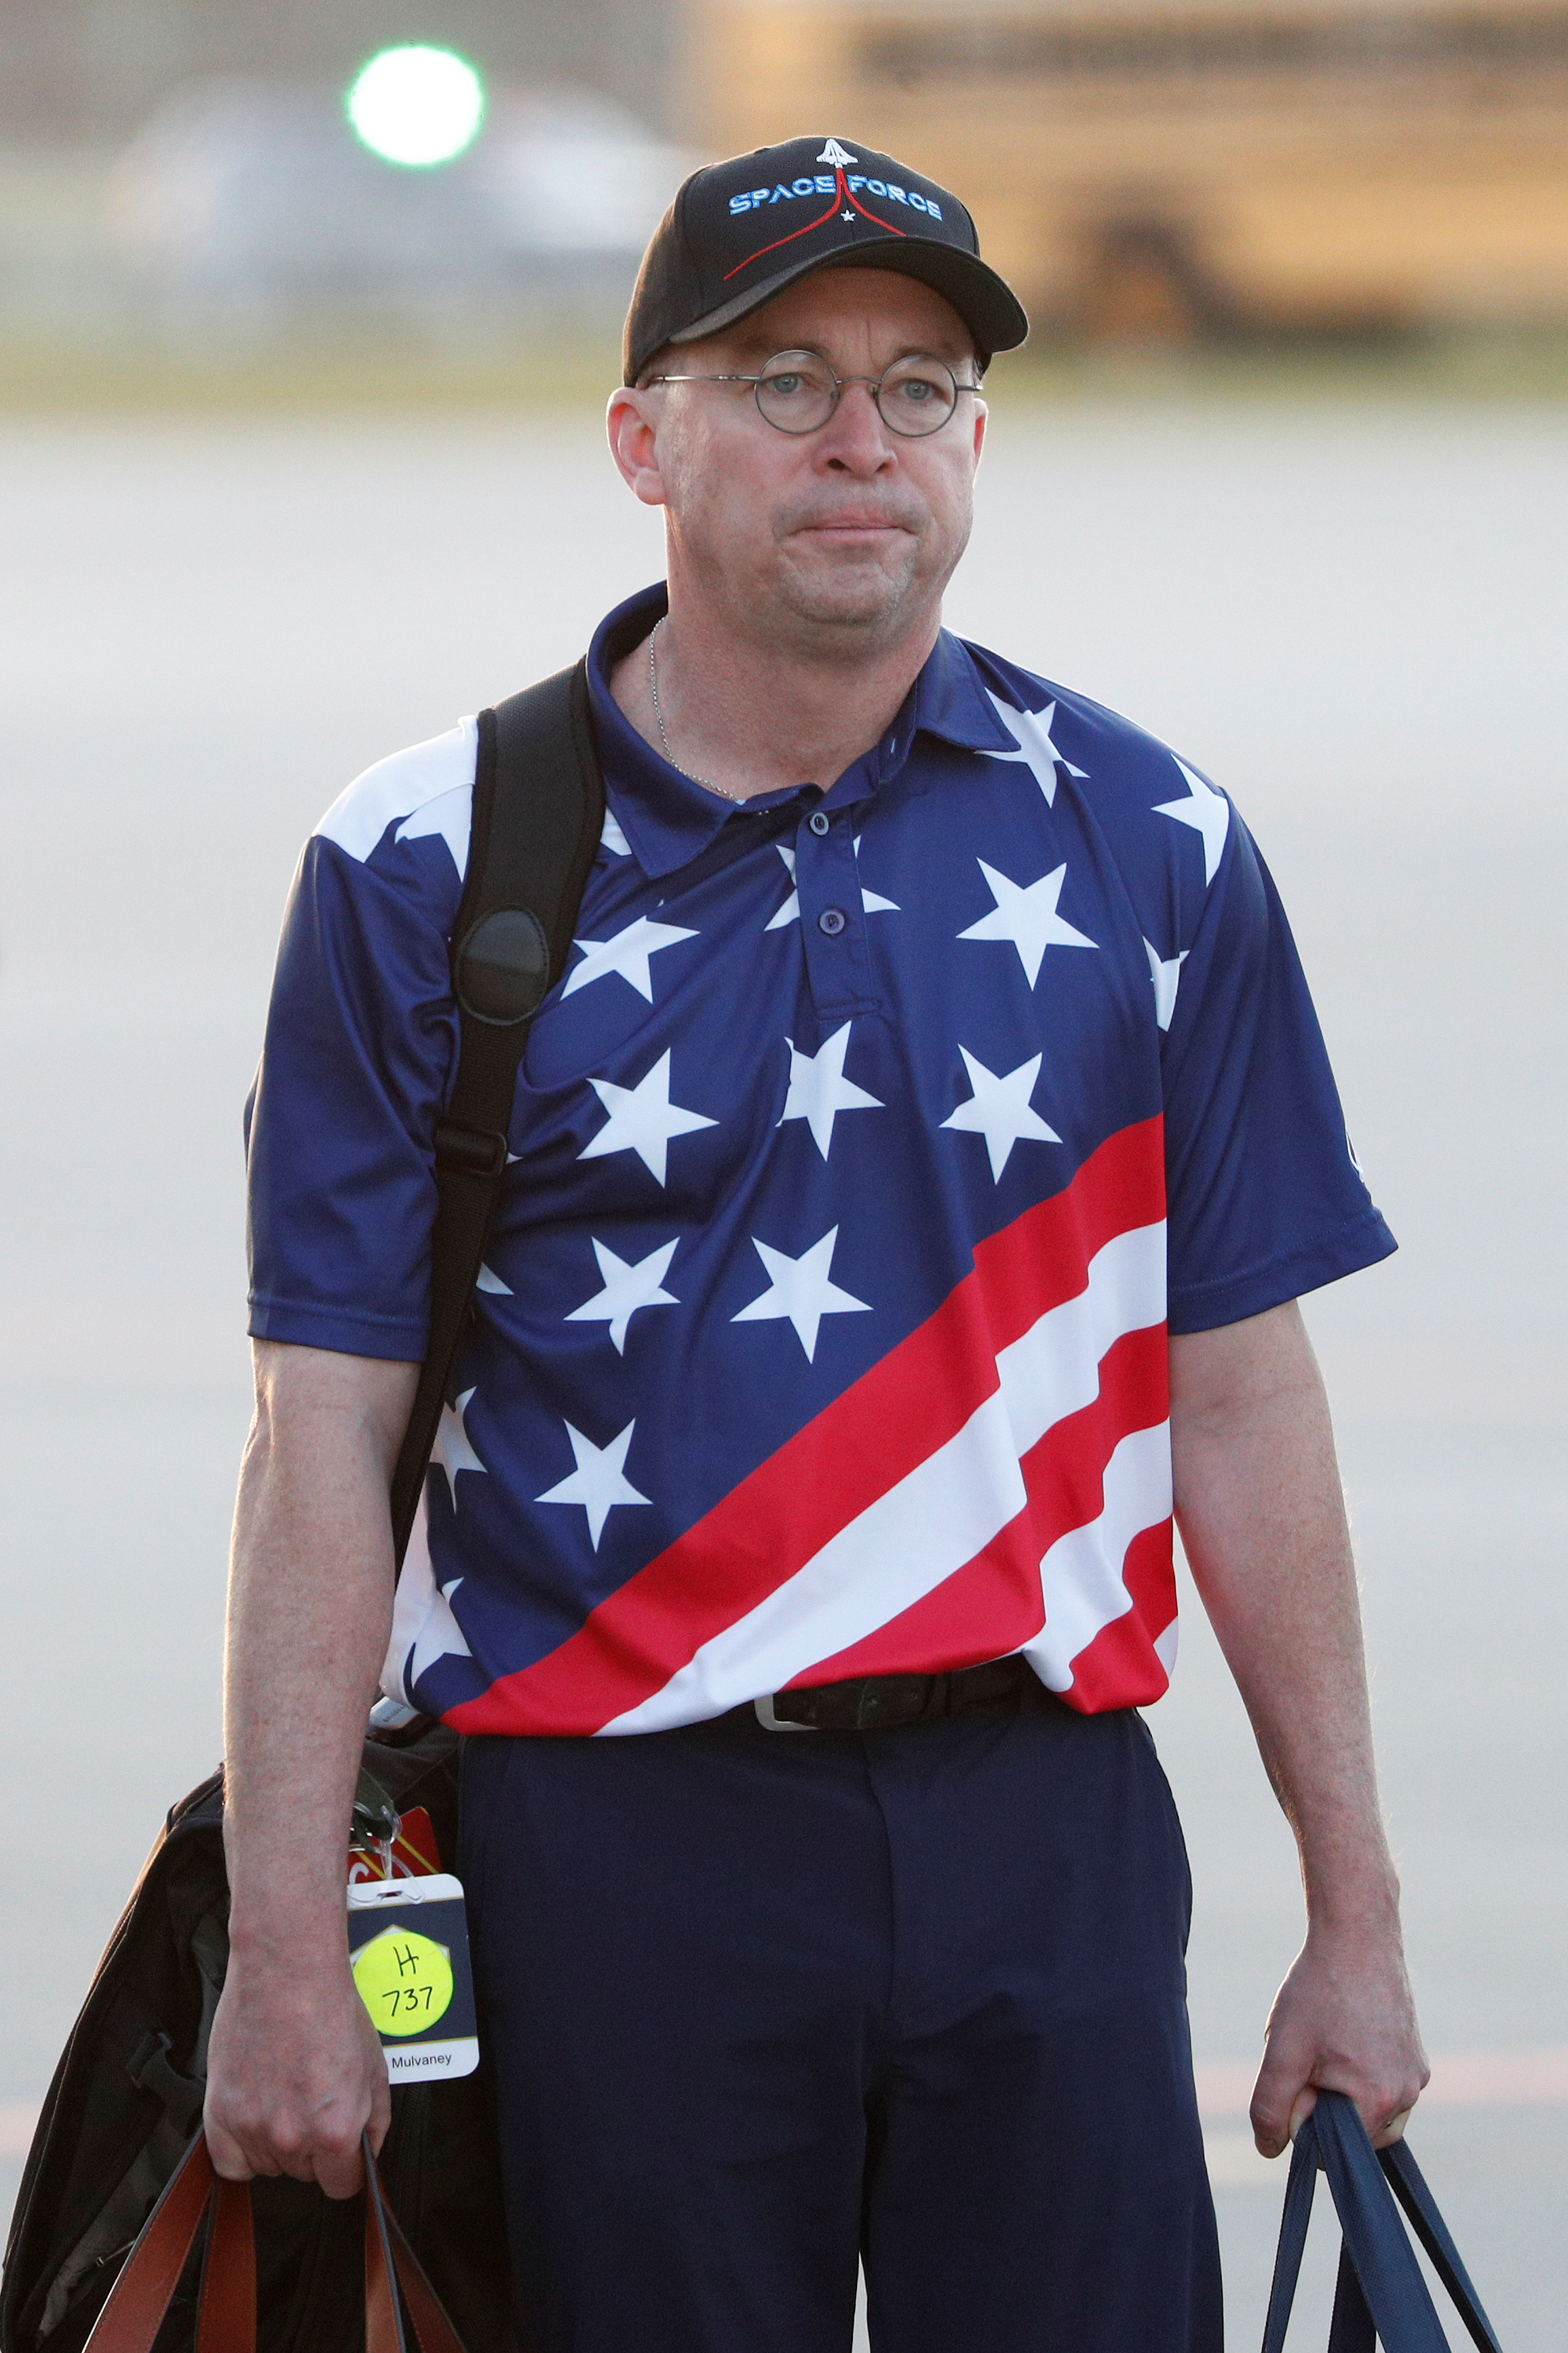 Acting White House Chief of Staff Mick Mulvaney descends from Air Force One wearing a Space Force hat at Palm Beach International Airport in West Palm Beach, Florida, U.S. November 29, 2019. (REUTERS/Tom Brenner)